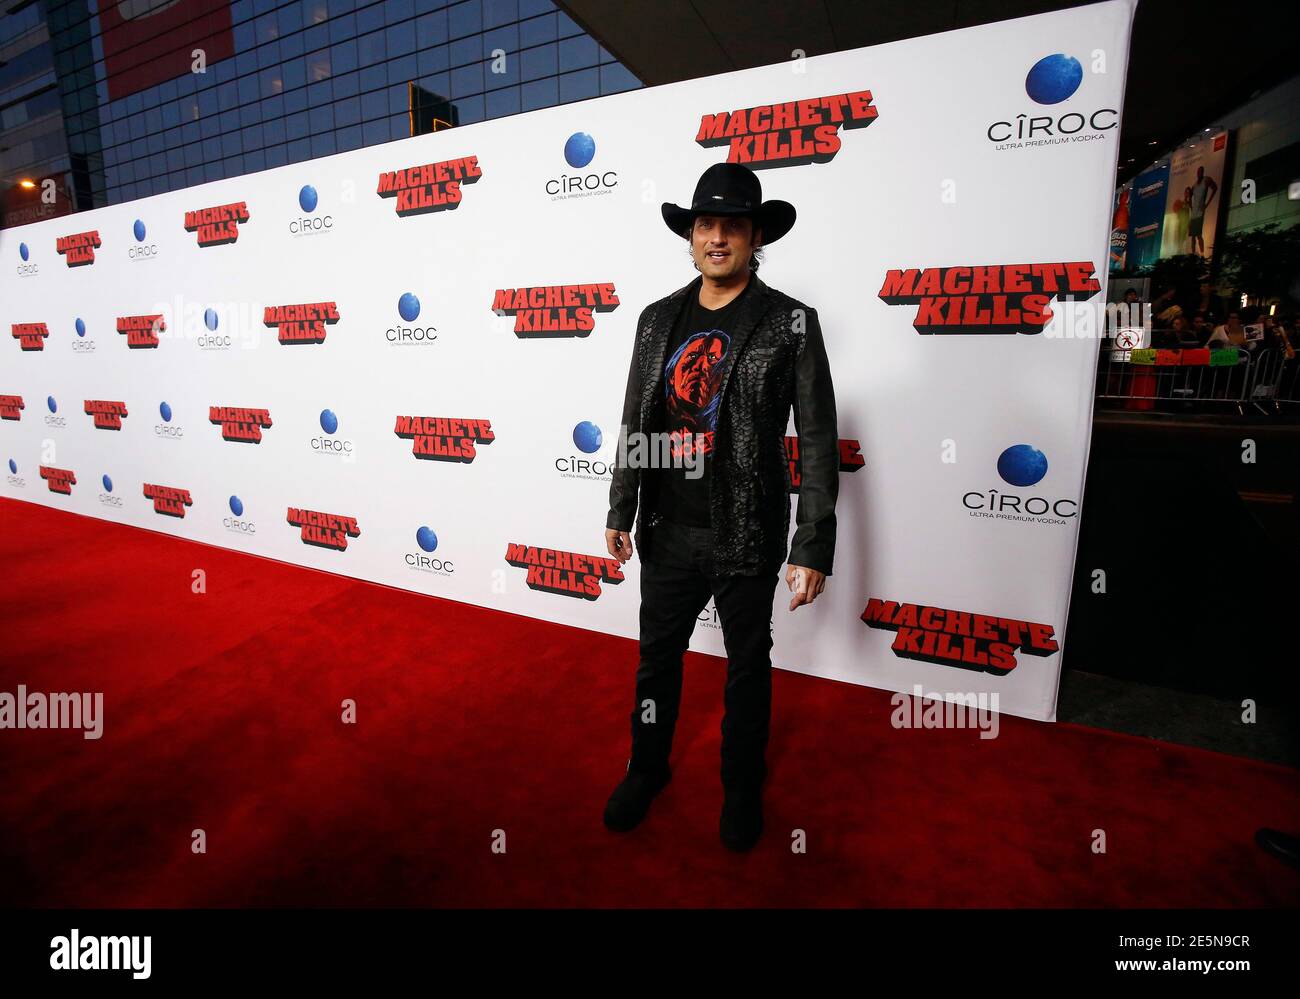 Director of the movie Robert Rodriguez poses at the film premiere of " Machete Kills" in Los Angeles, California October 2, 2013. The movie opens  in the U.S. on October 11. REUTERS/Mario Anzuoni (